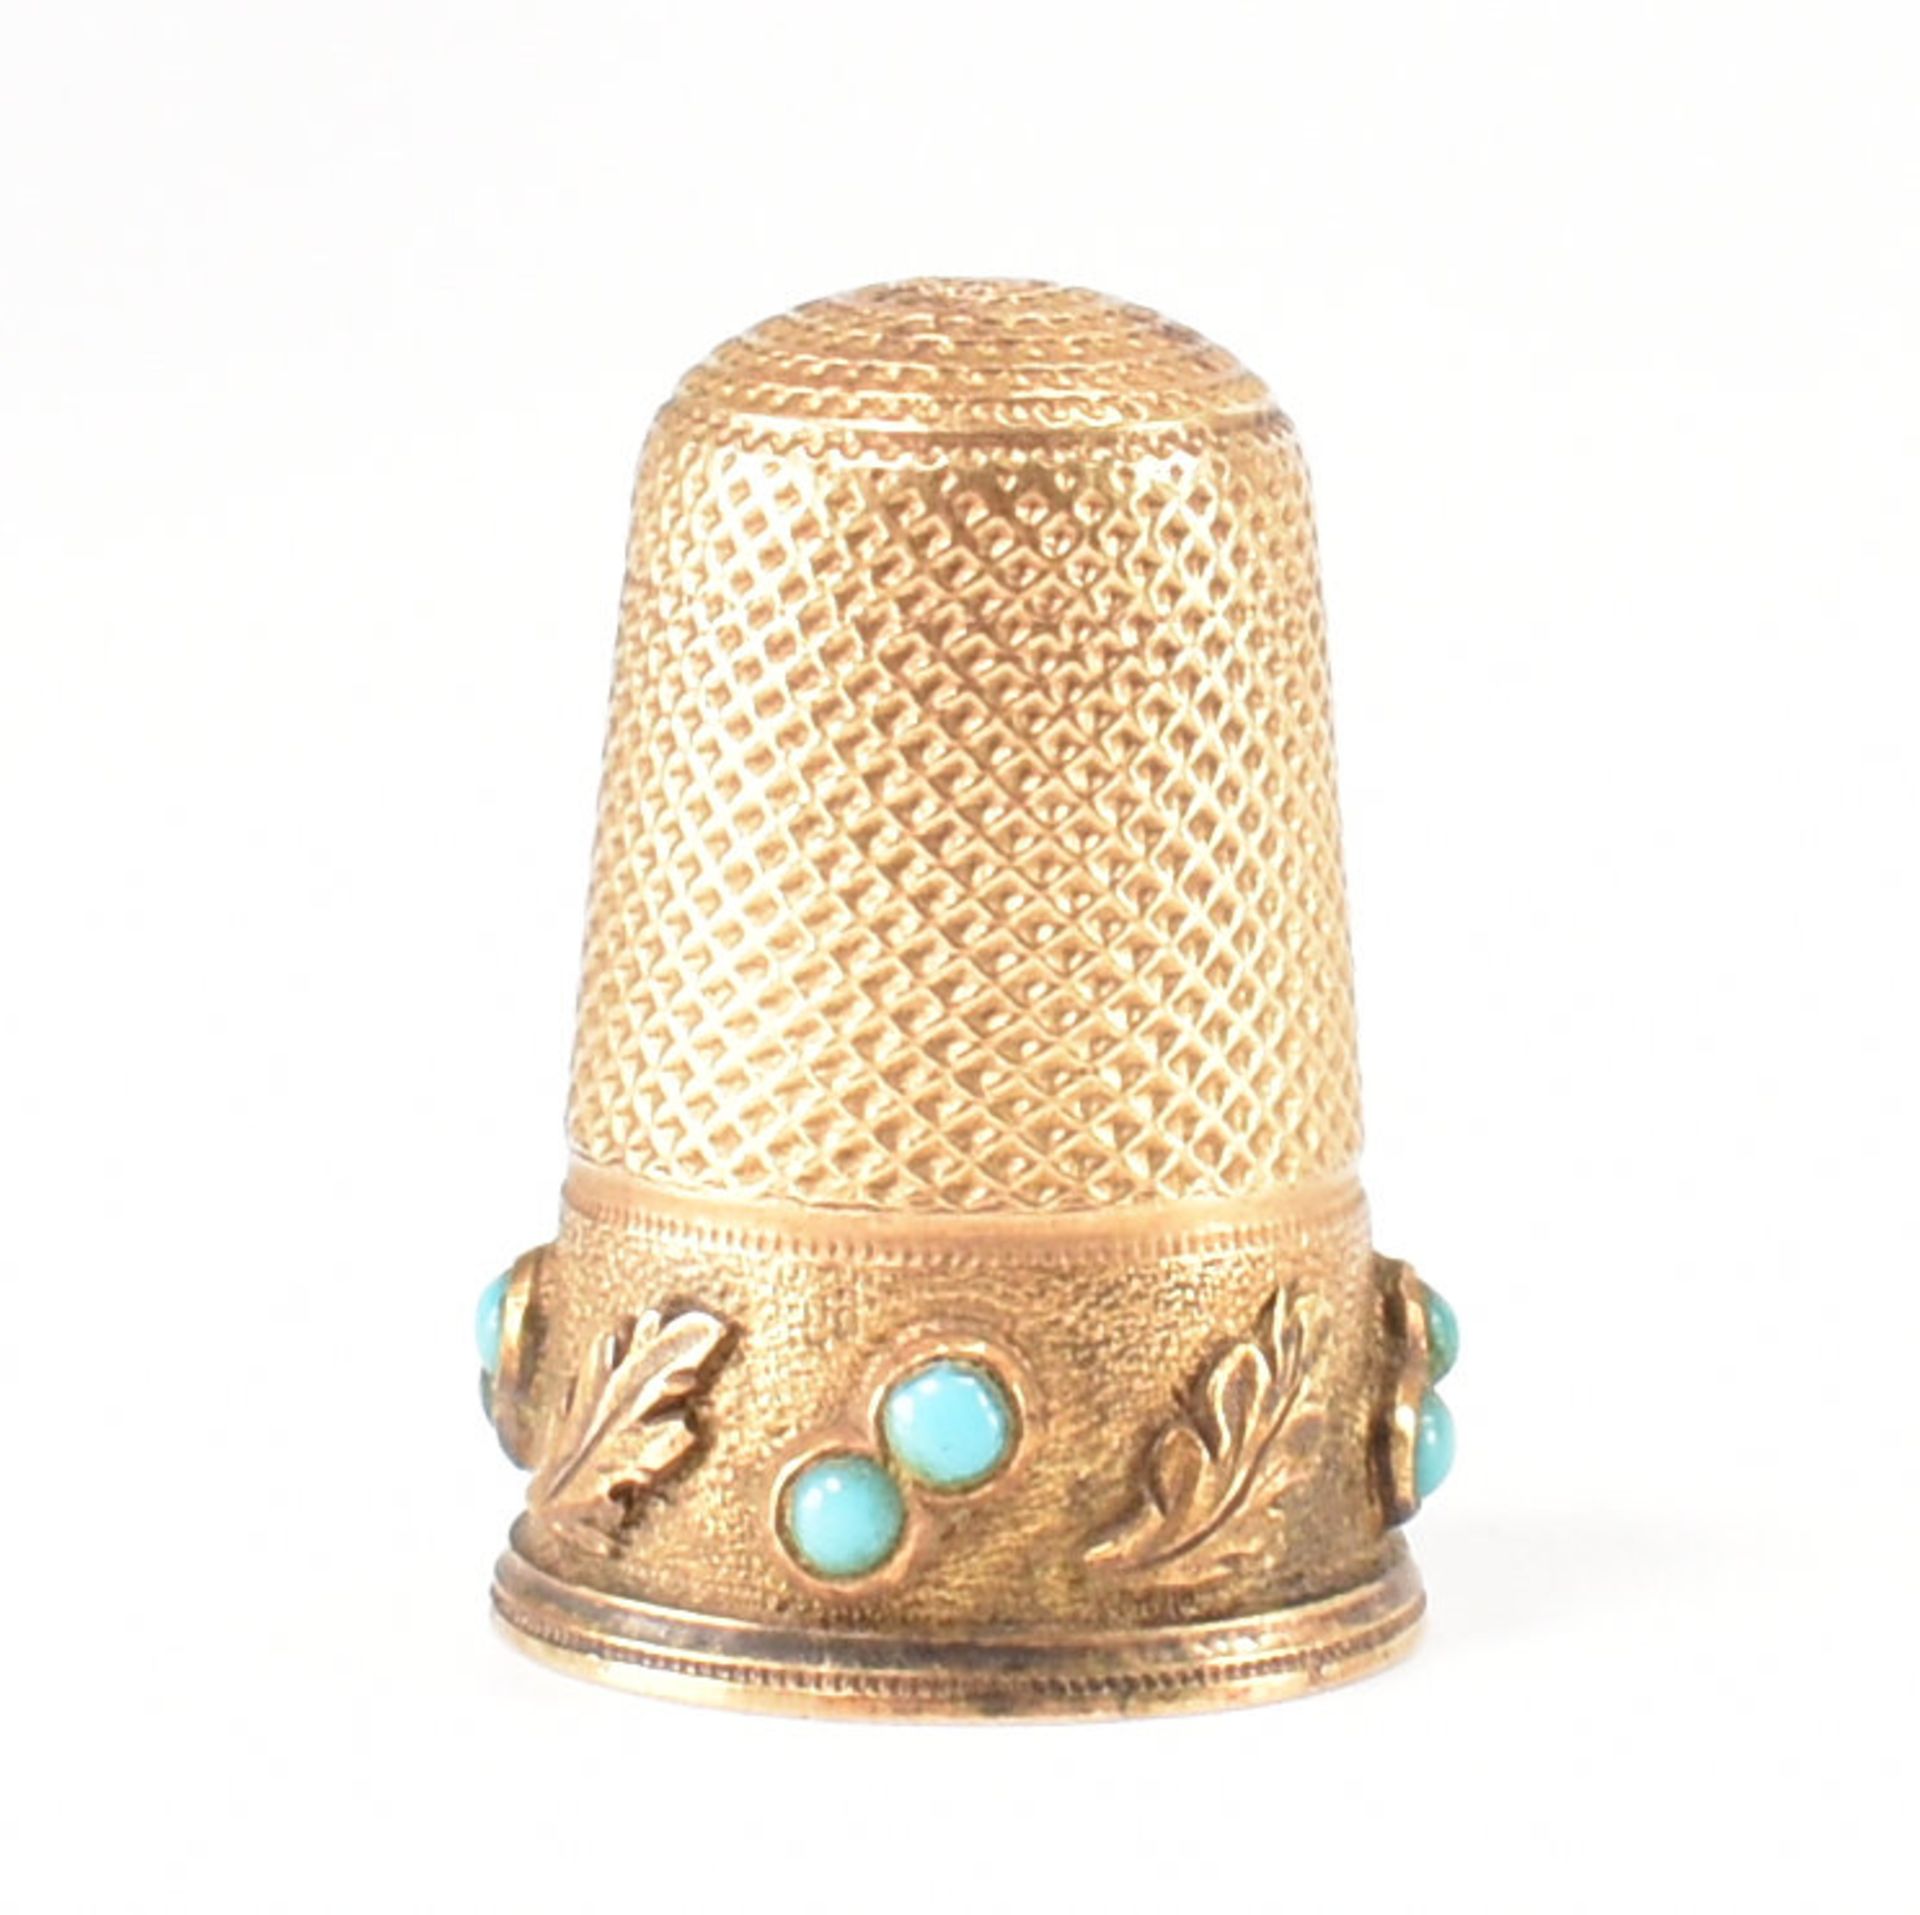 VICTORIAN GOLD & TURQUOISE THIMBLE - Image 2 of 7